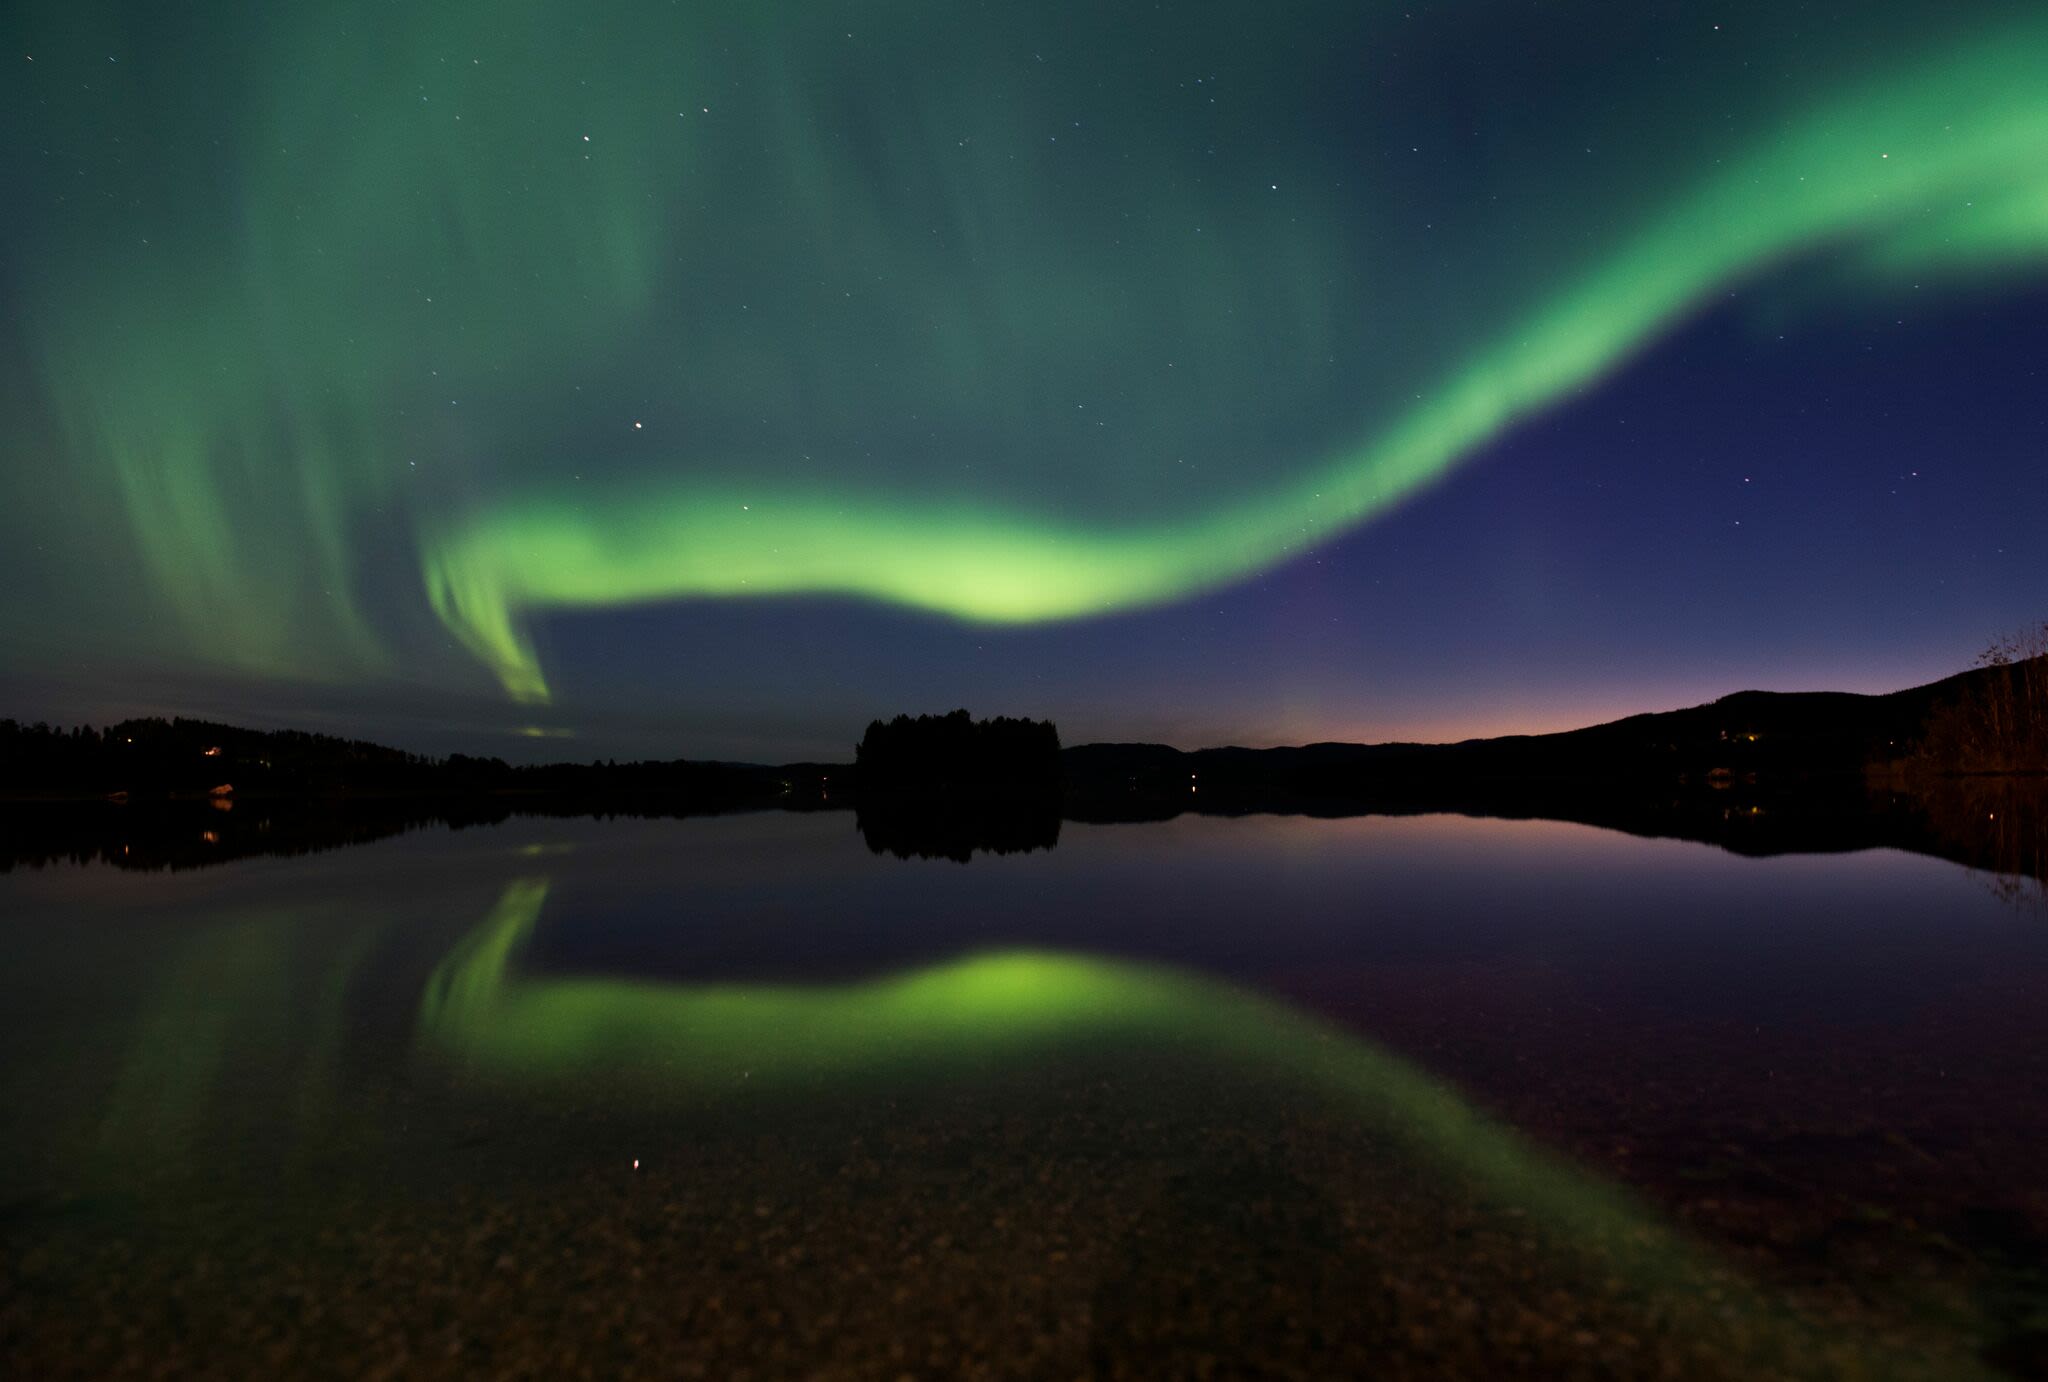 CT could see northern lights on Friday due to 'very rare' solar storm